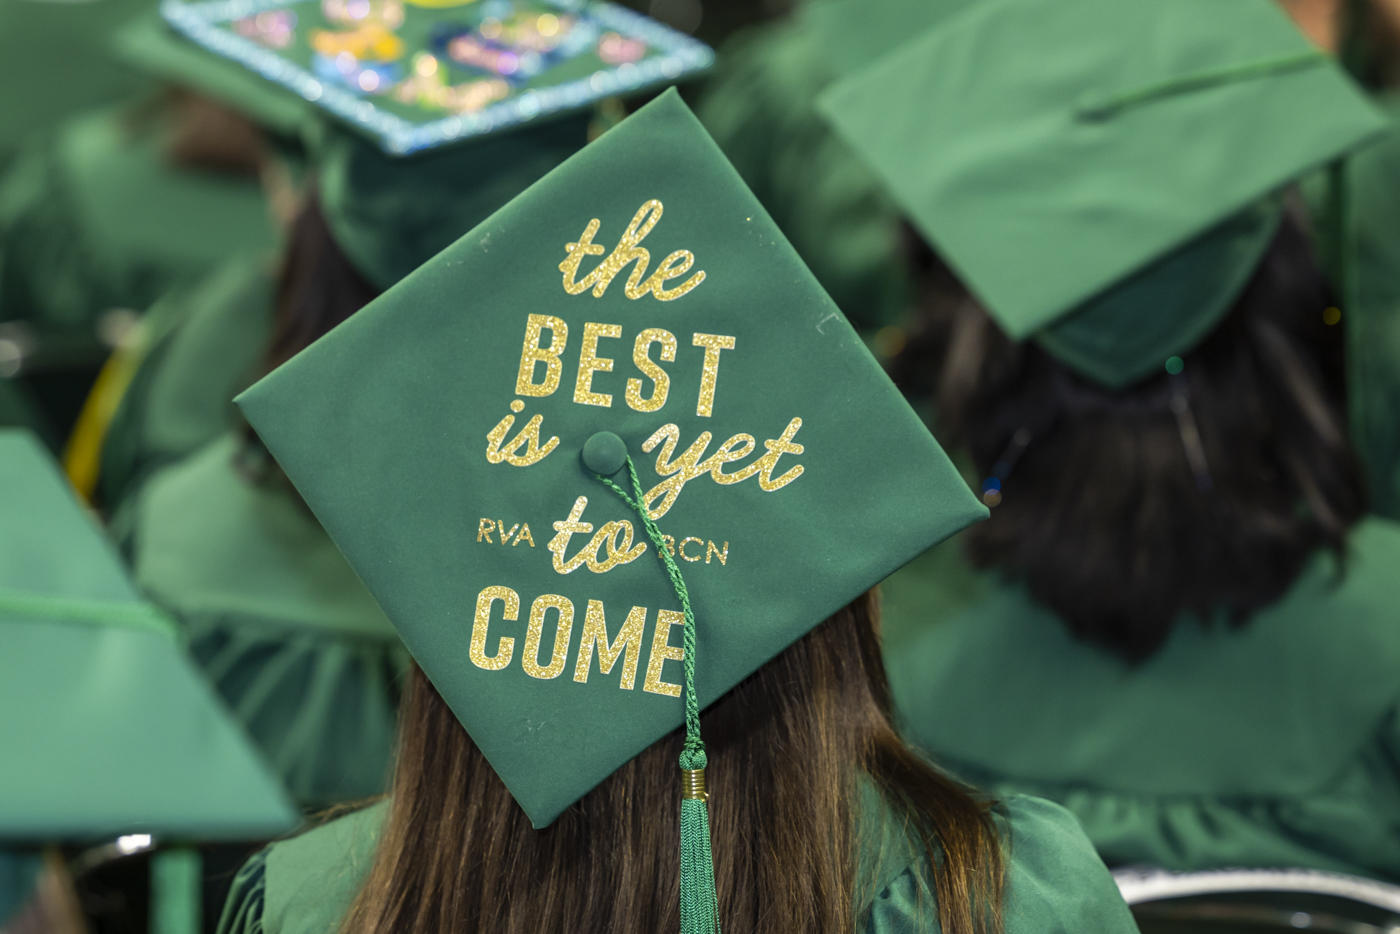 Graduation cap is decorated to say "The best is yet to come"